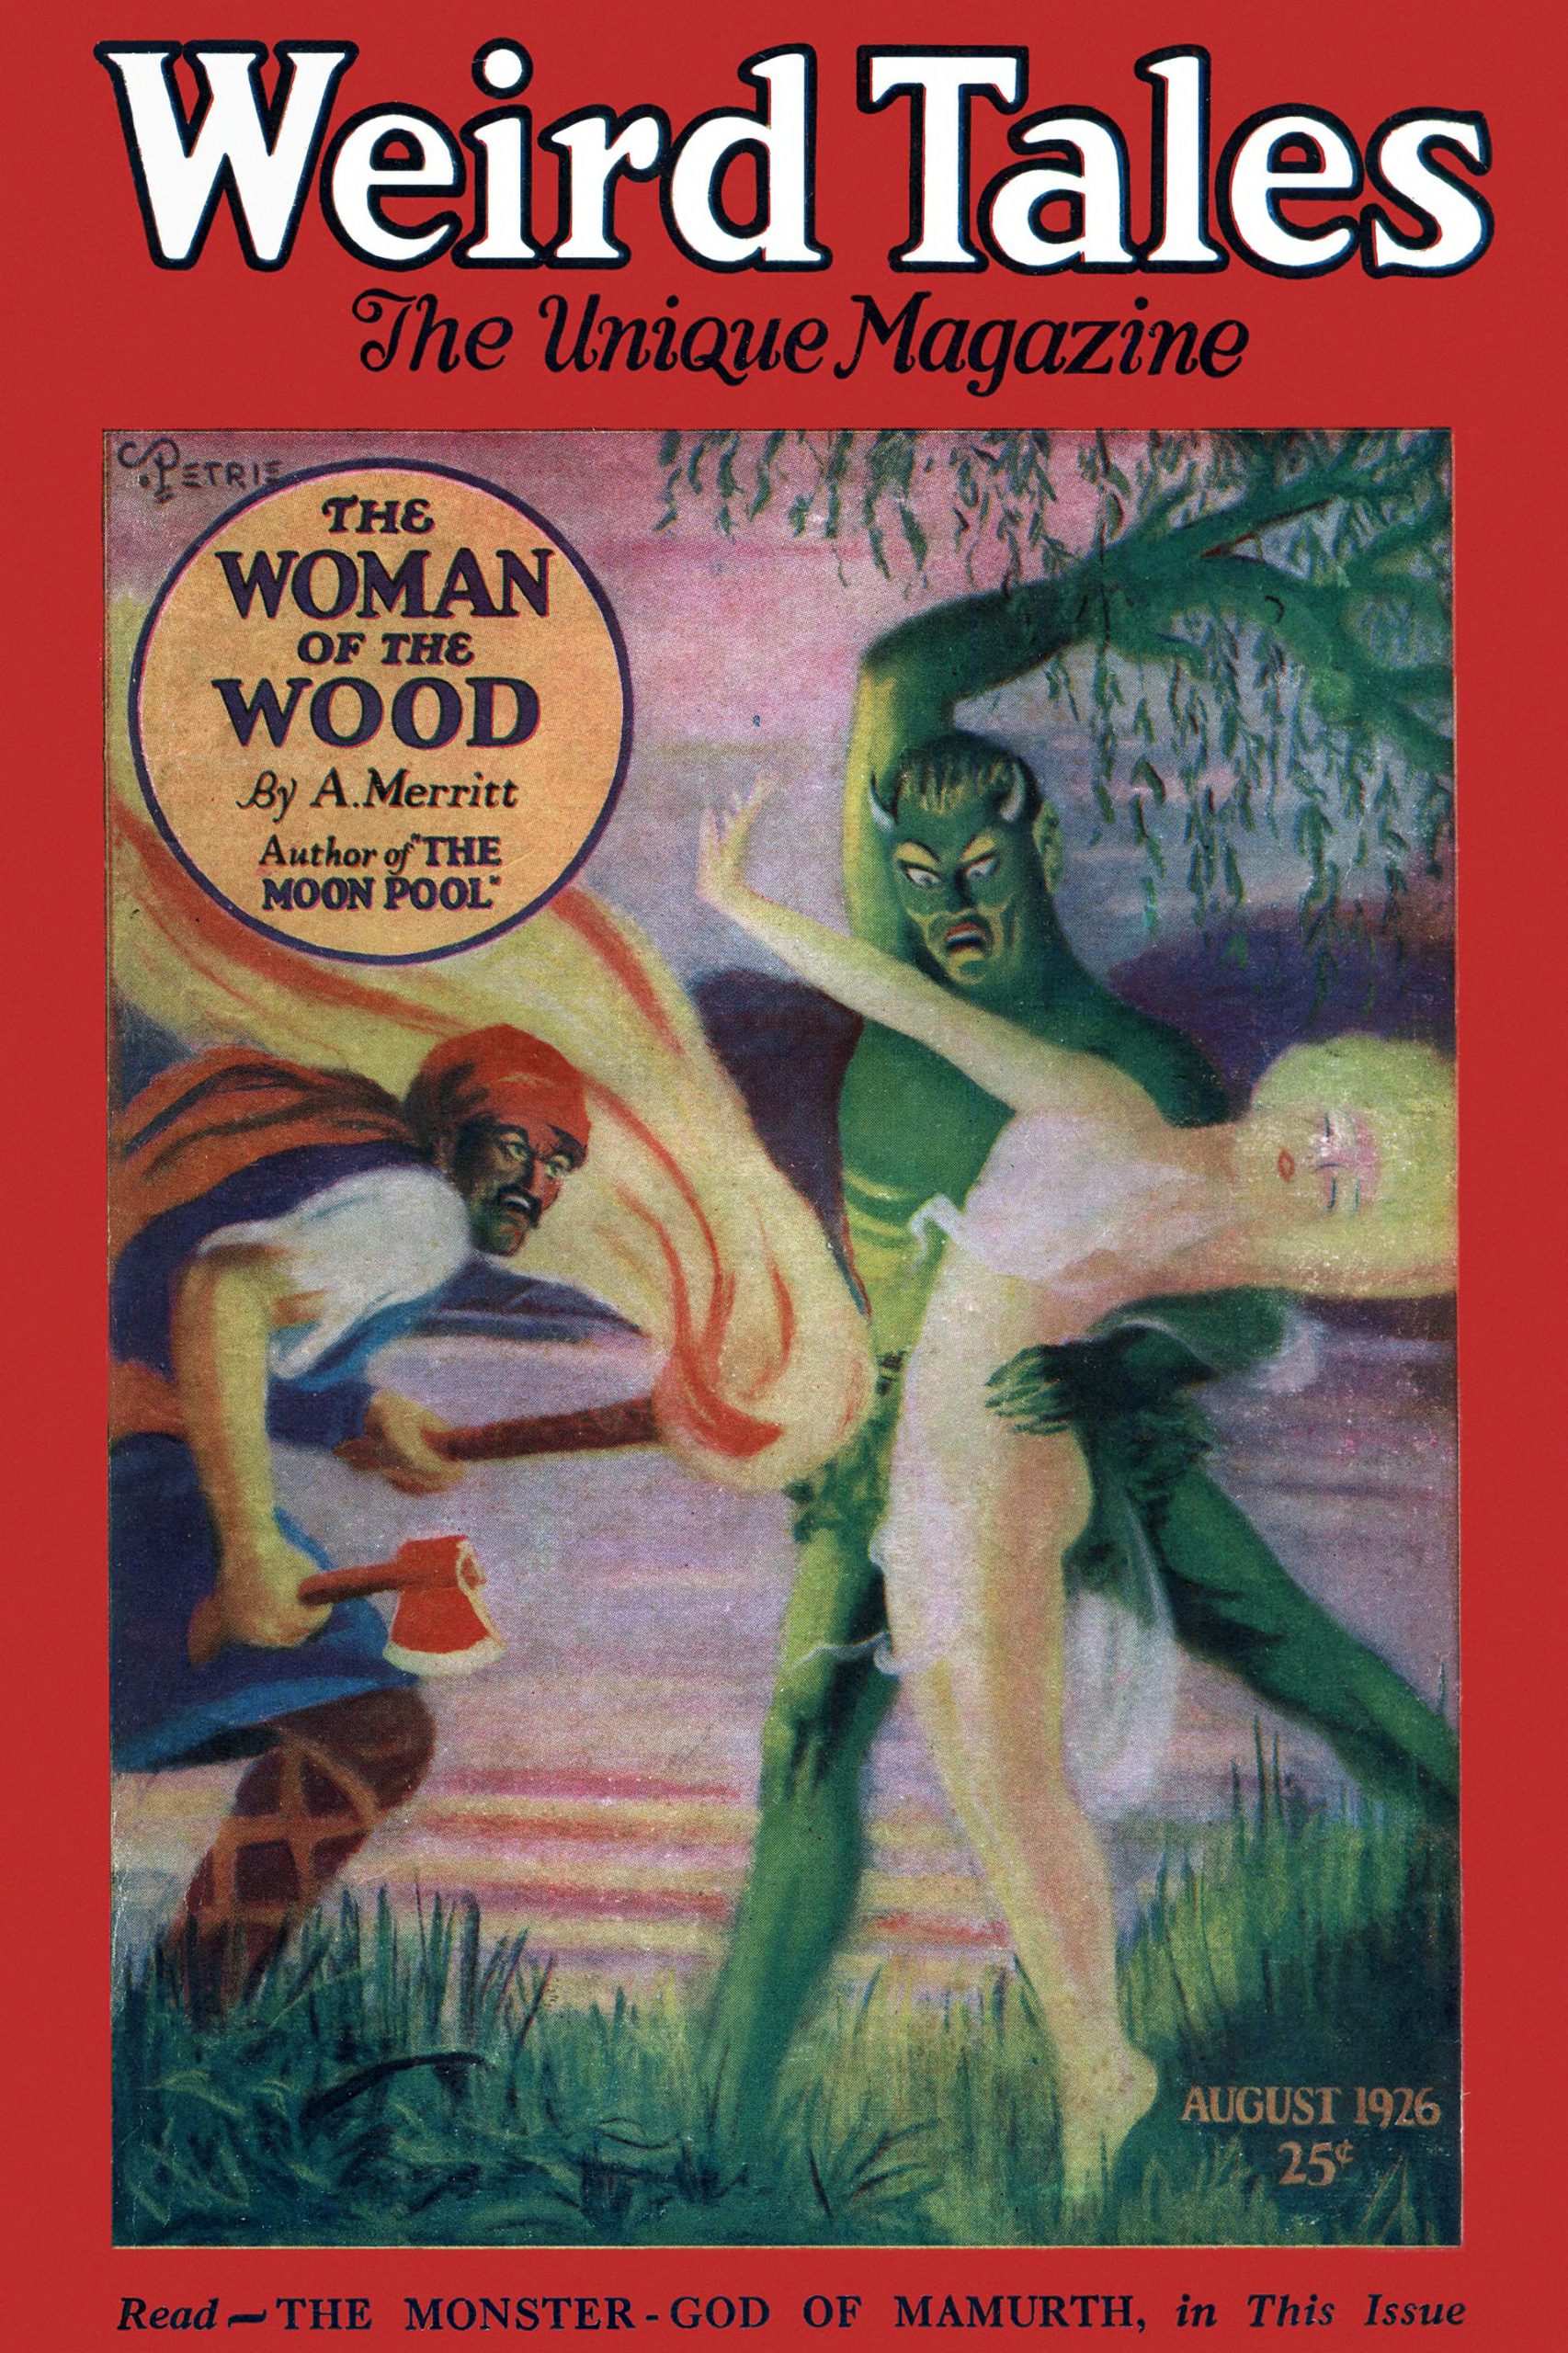 A diaphanously-clad blond woman is menaced by various figures on this C. Barker Petrie, Jr. cover of Weird Tales for August 1926.